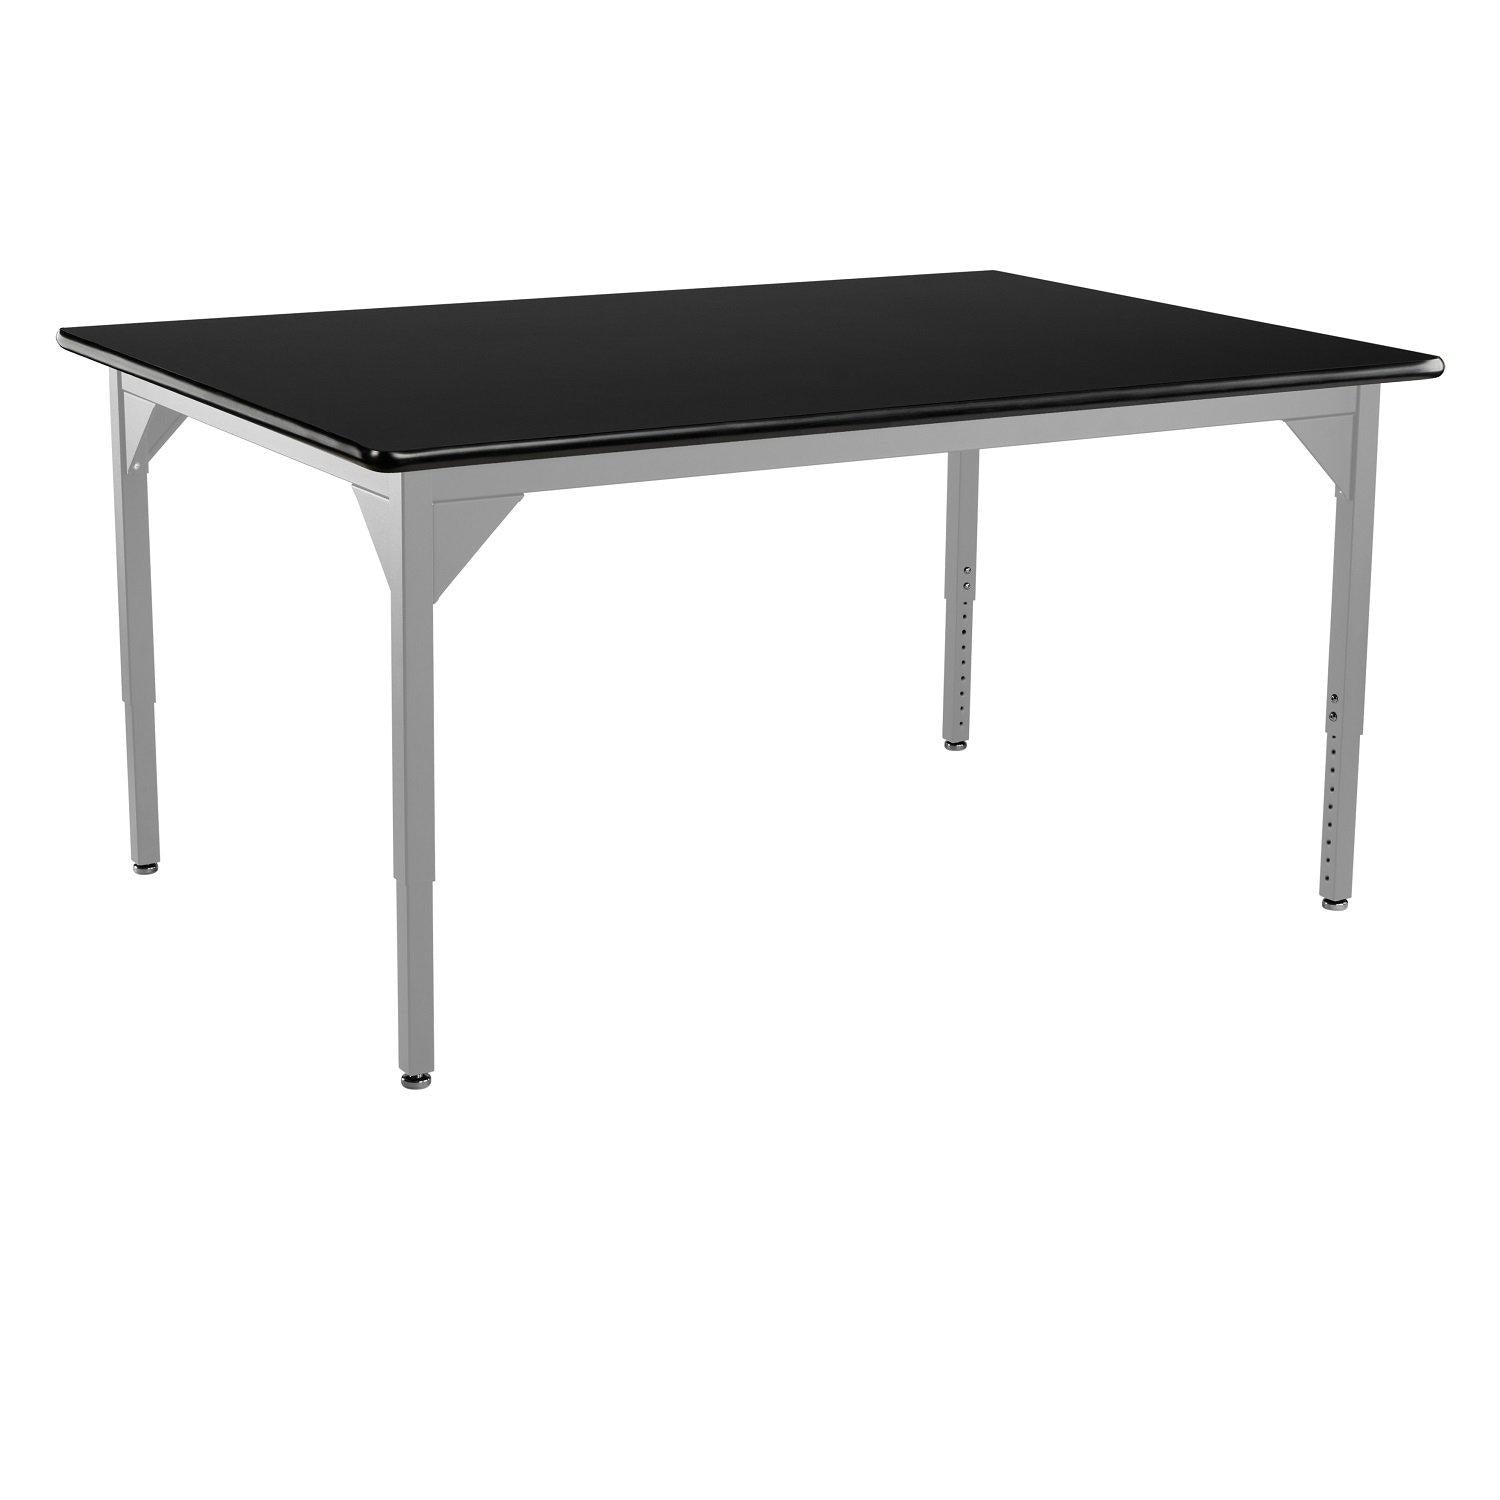 Heavy-Duty Height-Adjustable Utility Table, Soft Grey Frame, 48" x 48", High-Pressure Laminate Top with T-Mold Edge